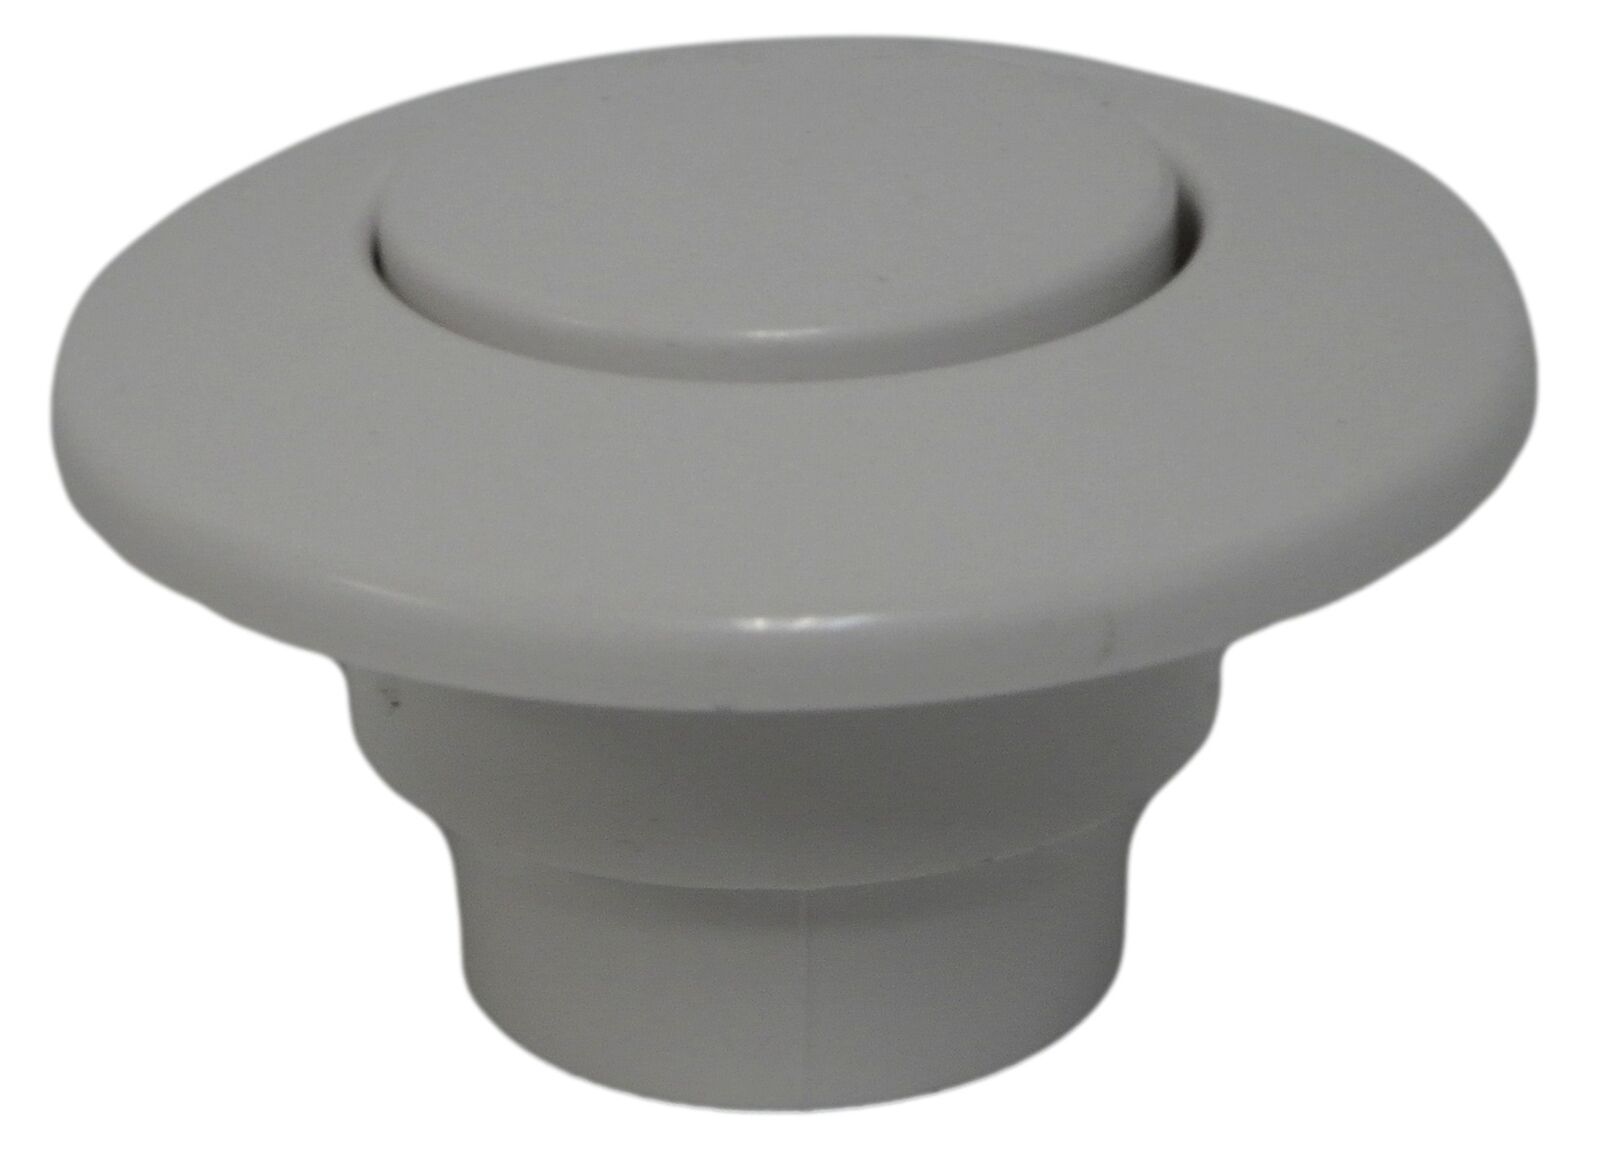 Insinkerator Stc-wh Air Switch Sink Top Mounted Plastic Air Switch Button White